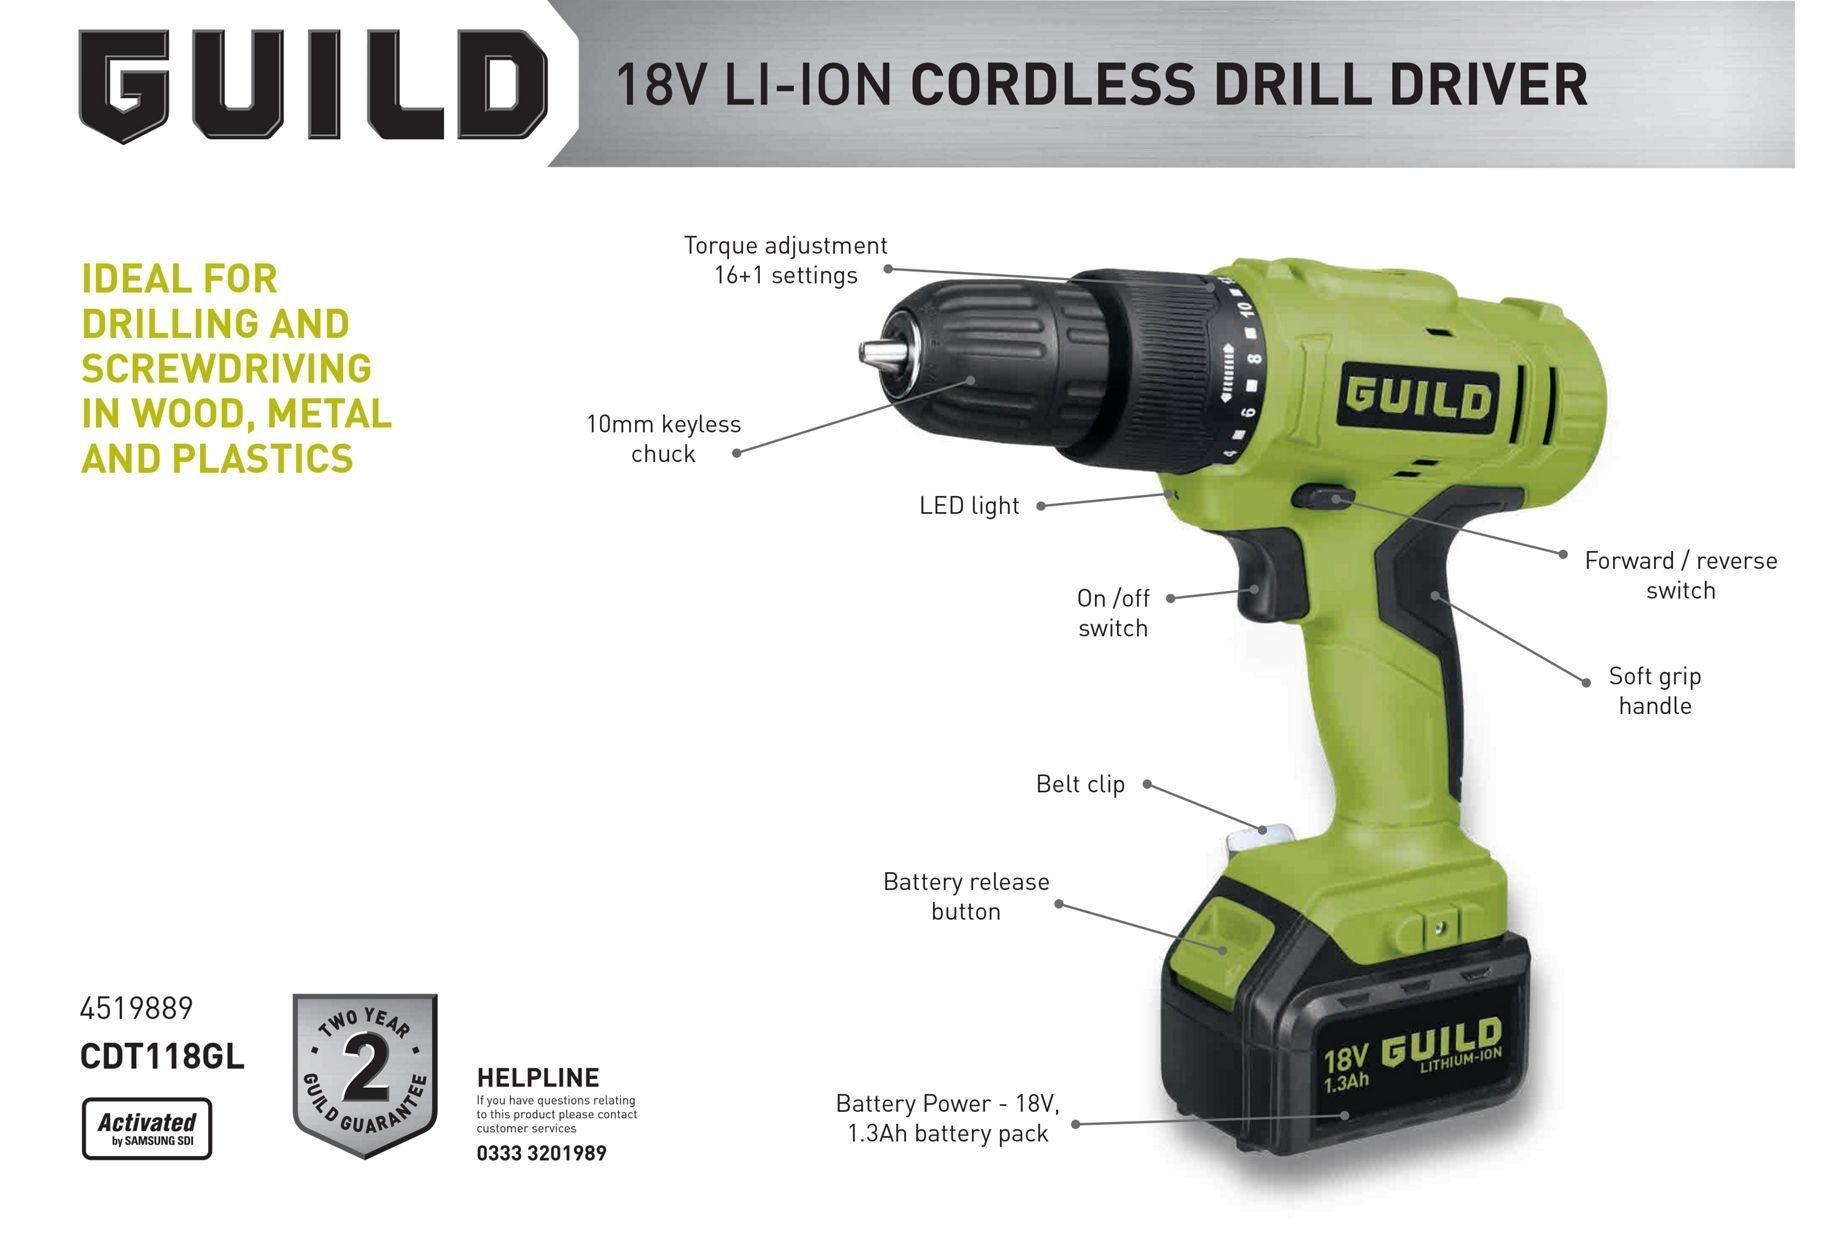 Guild 1.3AH Cordless Drill Driver Review